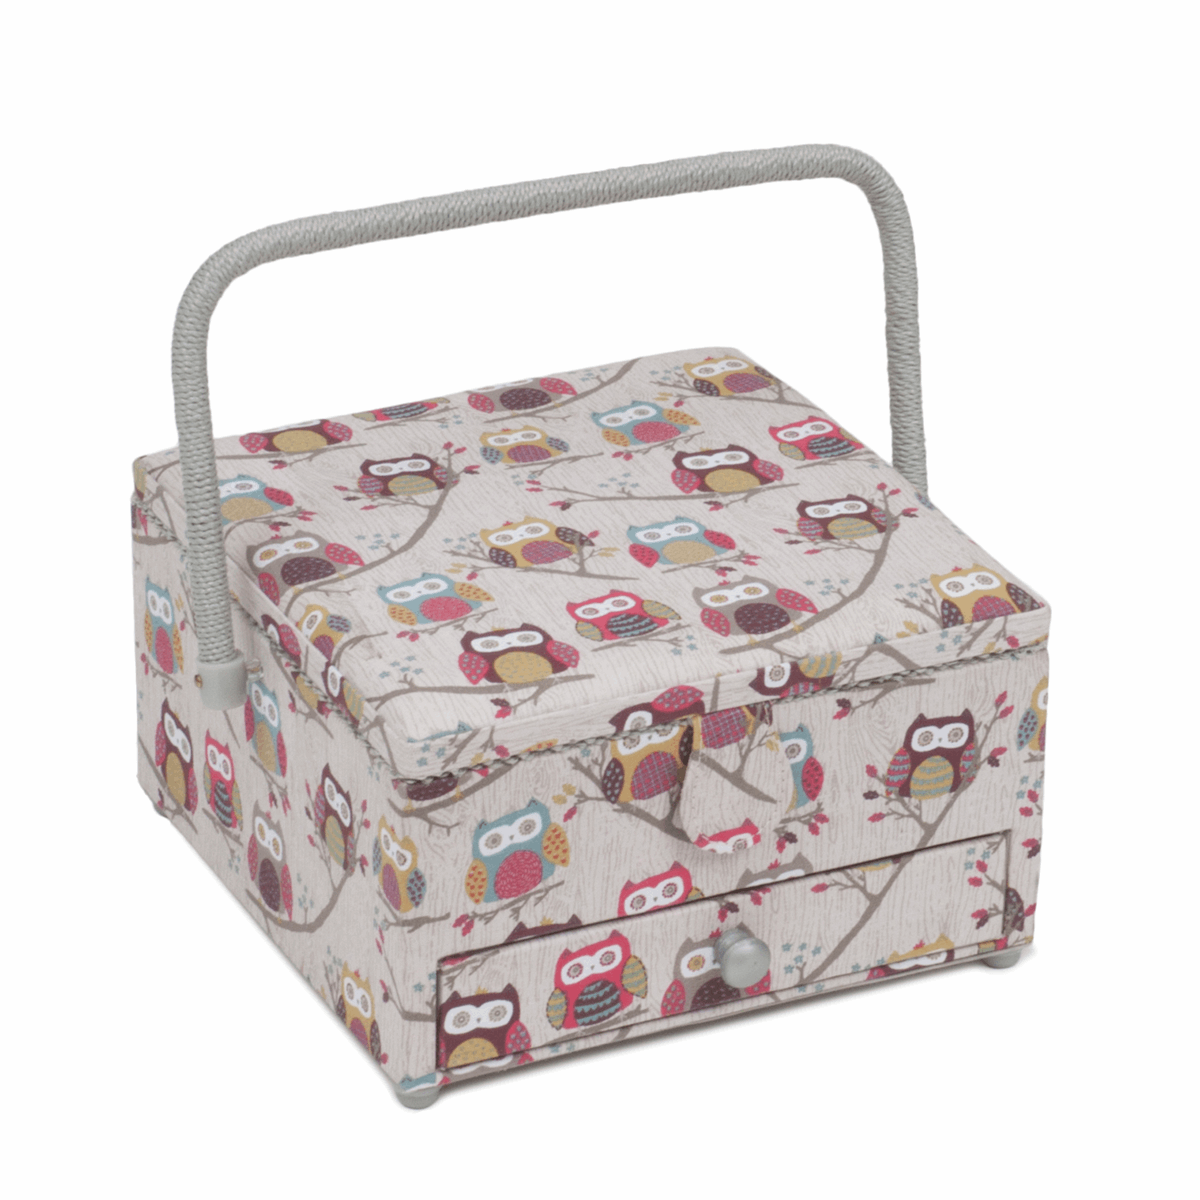 Hoot Sewing Box with Drawer - Large Square